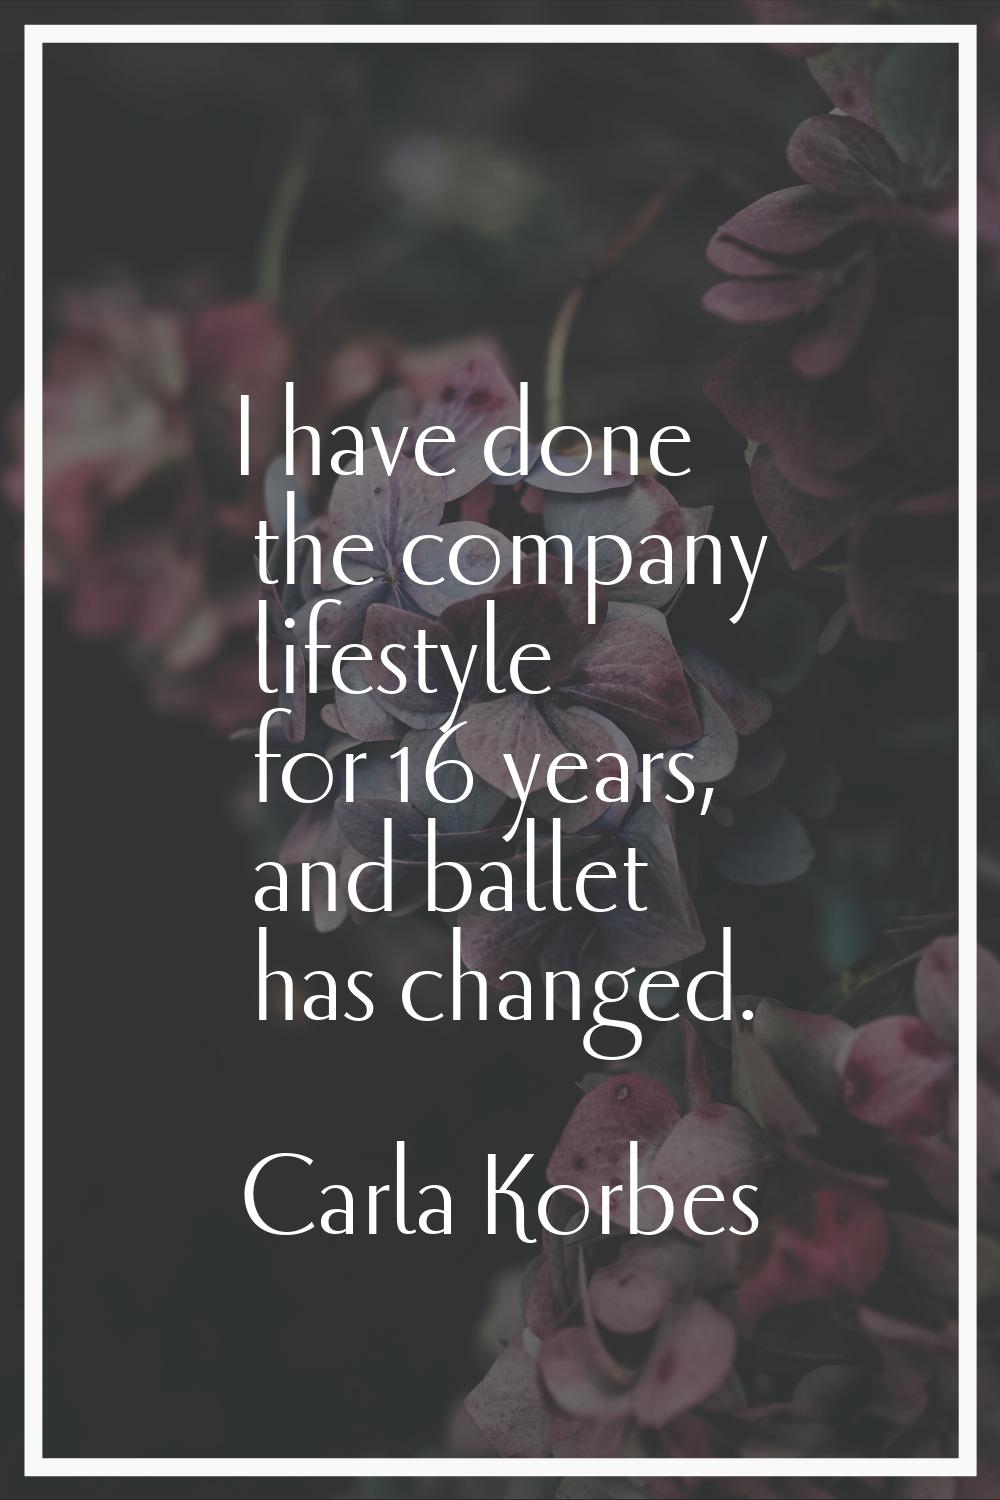 I have done the company lifestyle for 16 years, and ballet has changed.